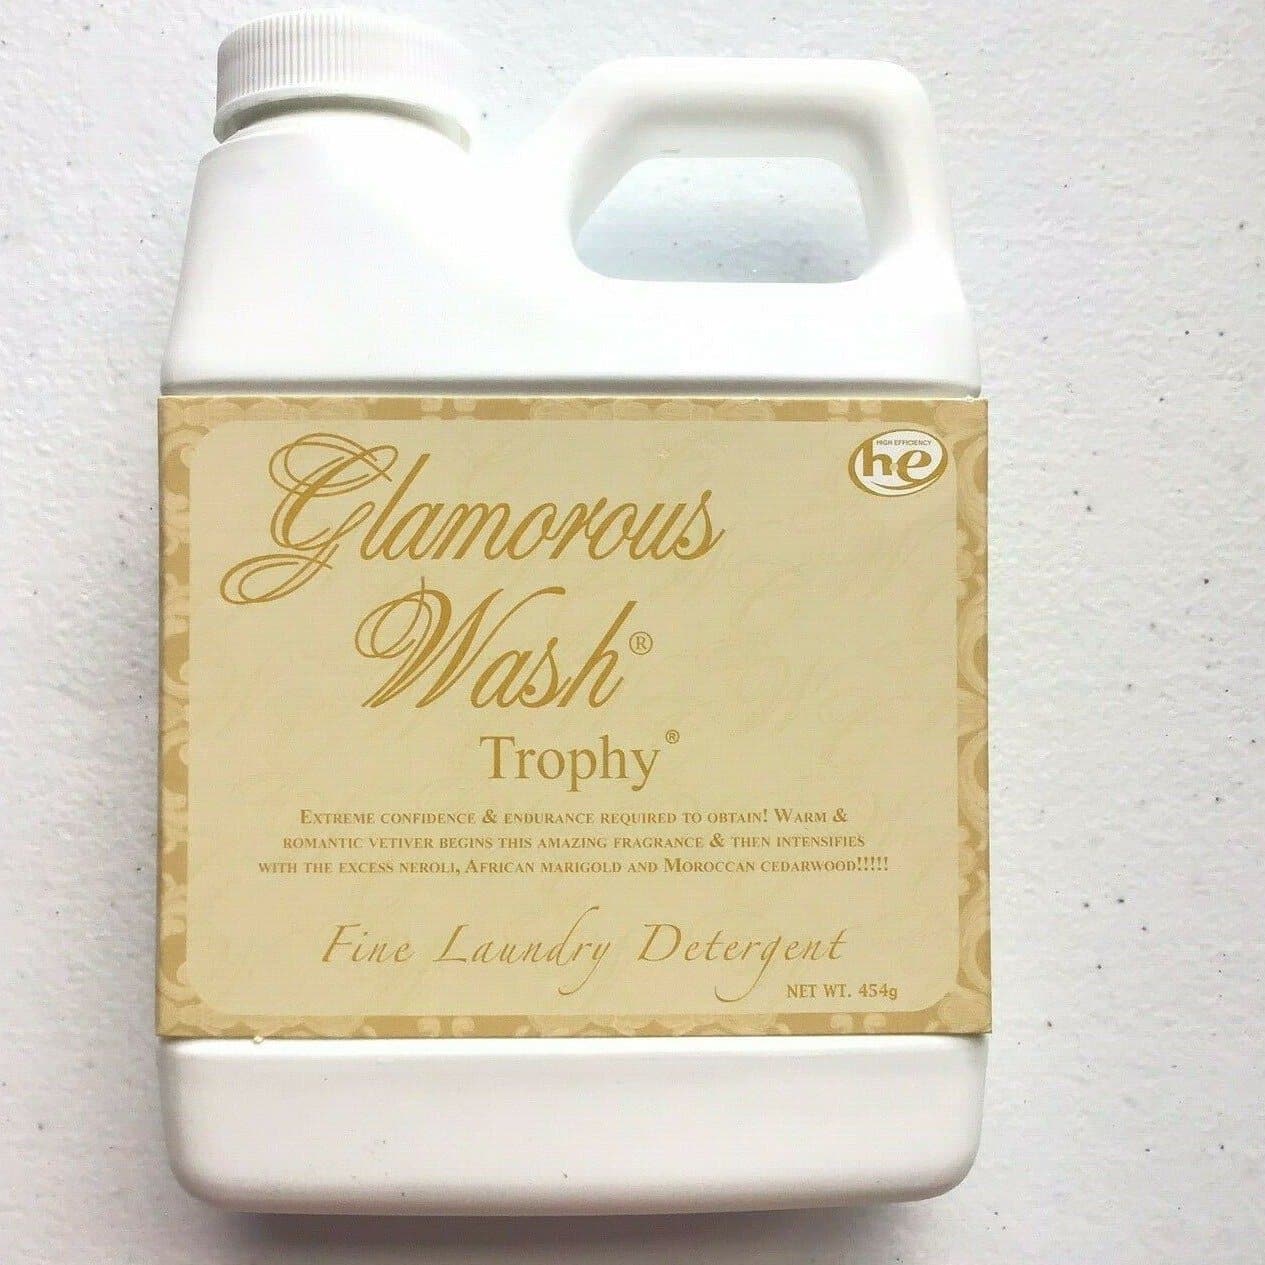 Glamorous Wash in Trophy 1892 grams / 1.89 Liters-Delicate Wash-Tyler Candle Company-Anna Bella Fine Lingerie, Reveal Your Most Gorgeous Self!